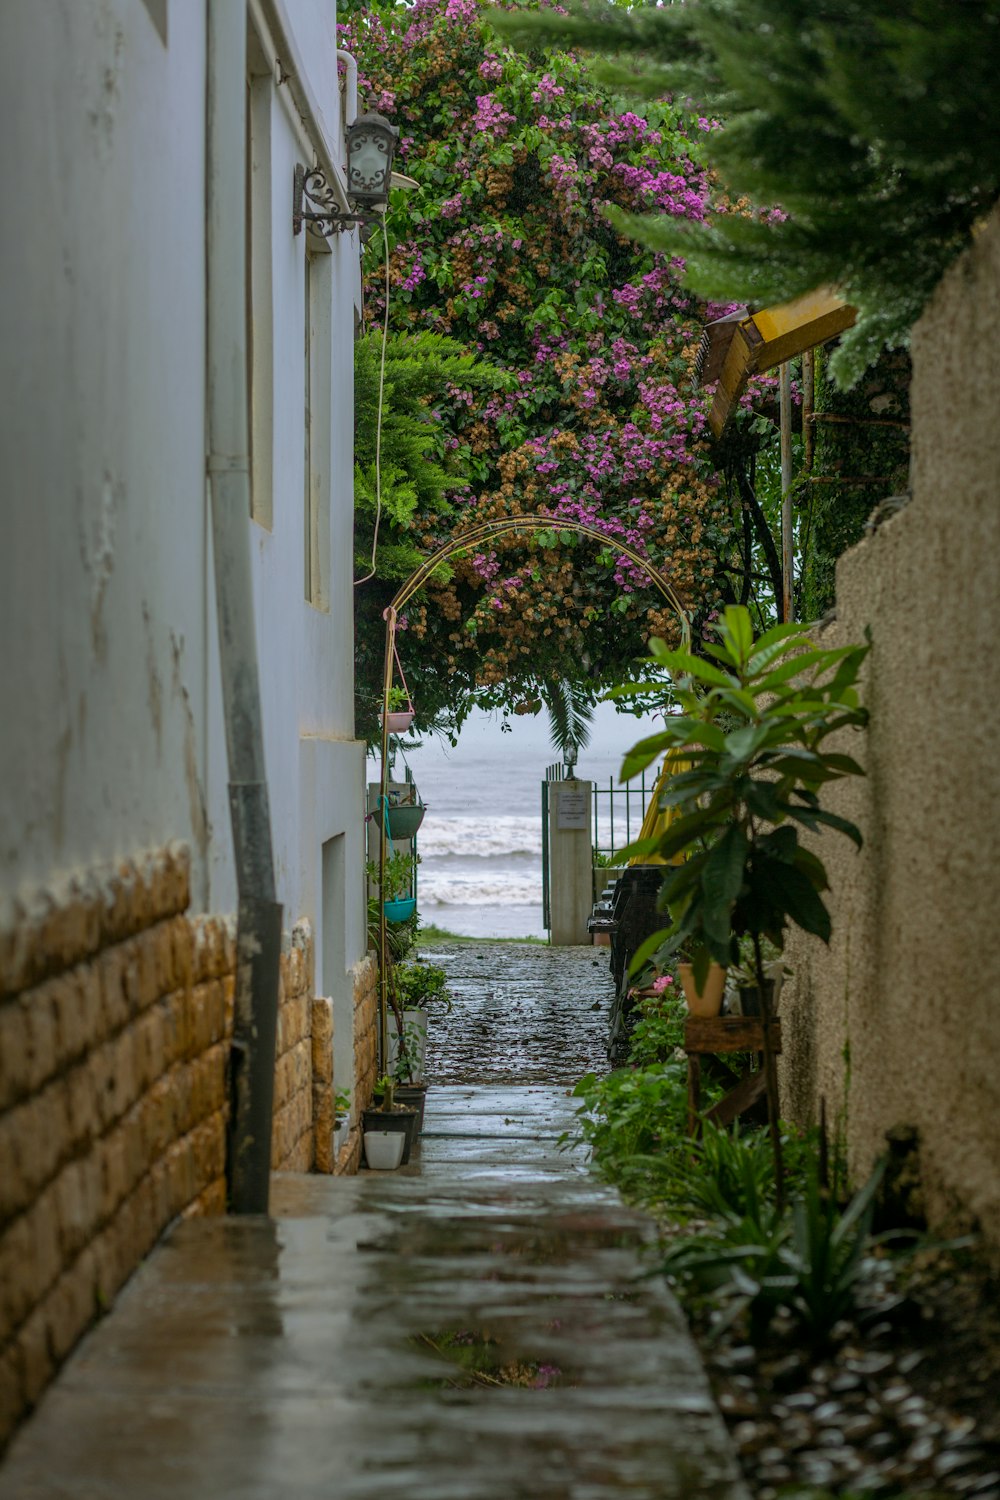 a narrow alley way with trees and flowers on either side